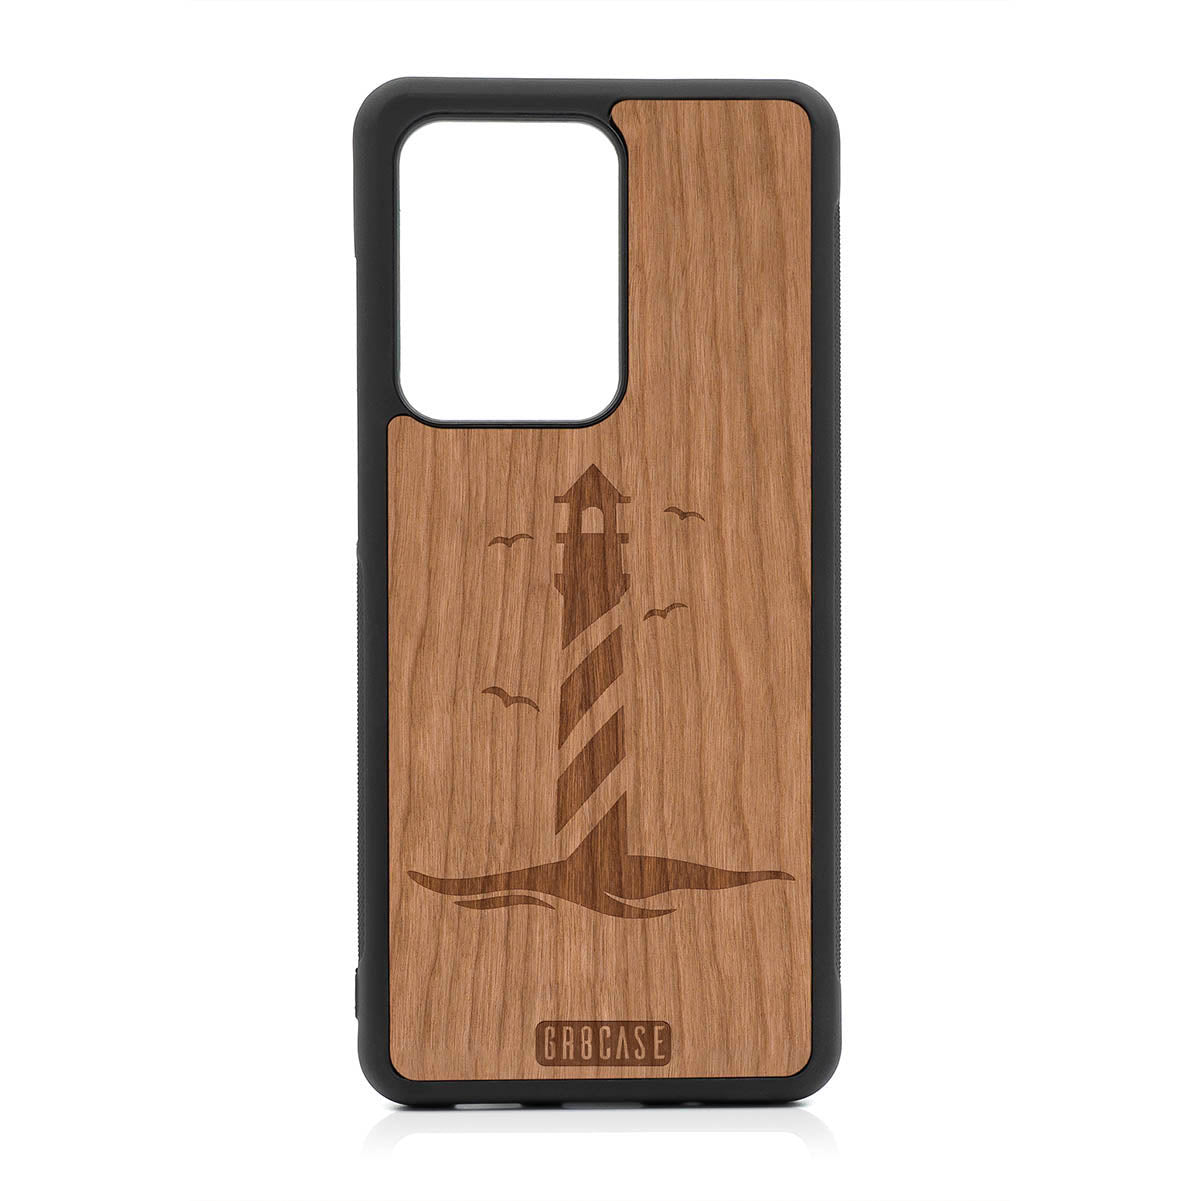 Lighthouse Design Wood Case For Samsung Galaxy S20 Ultra